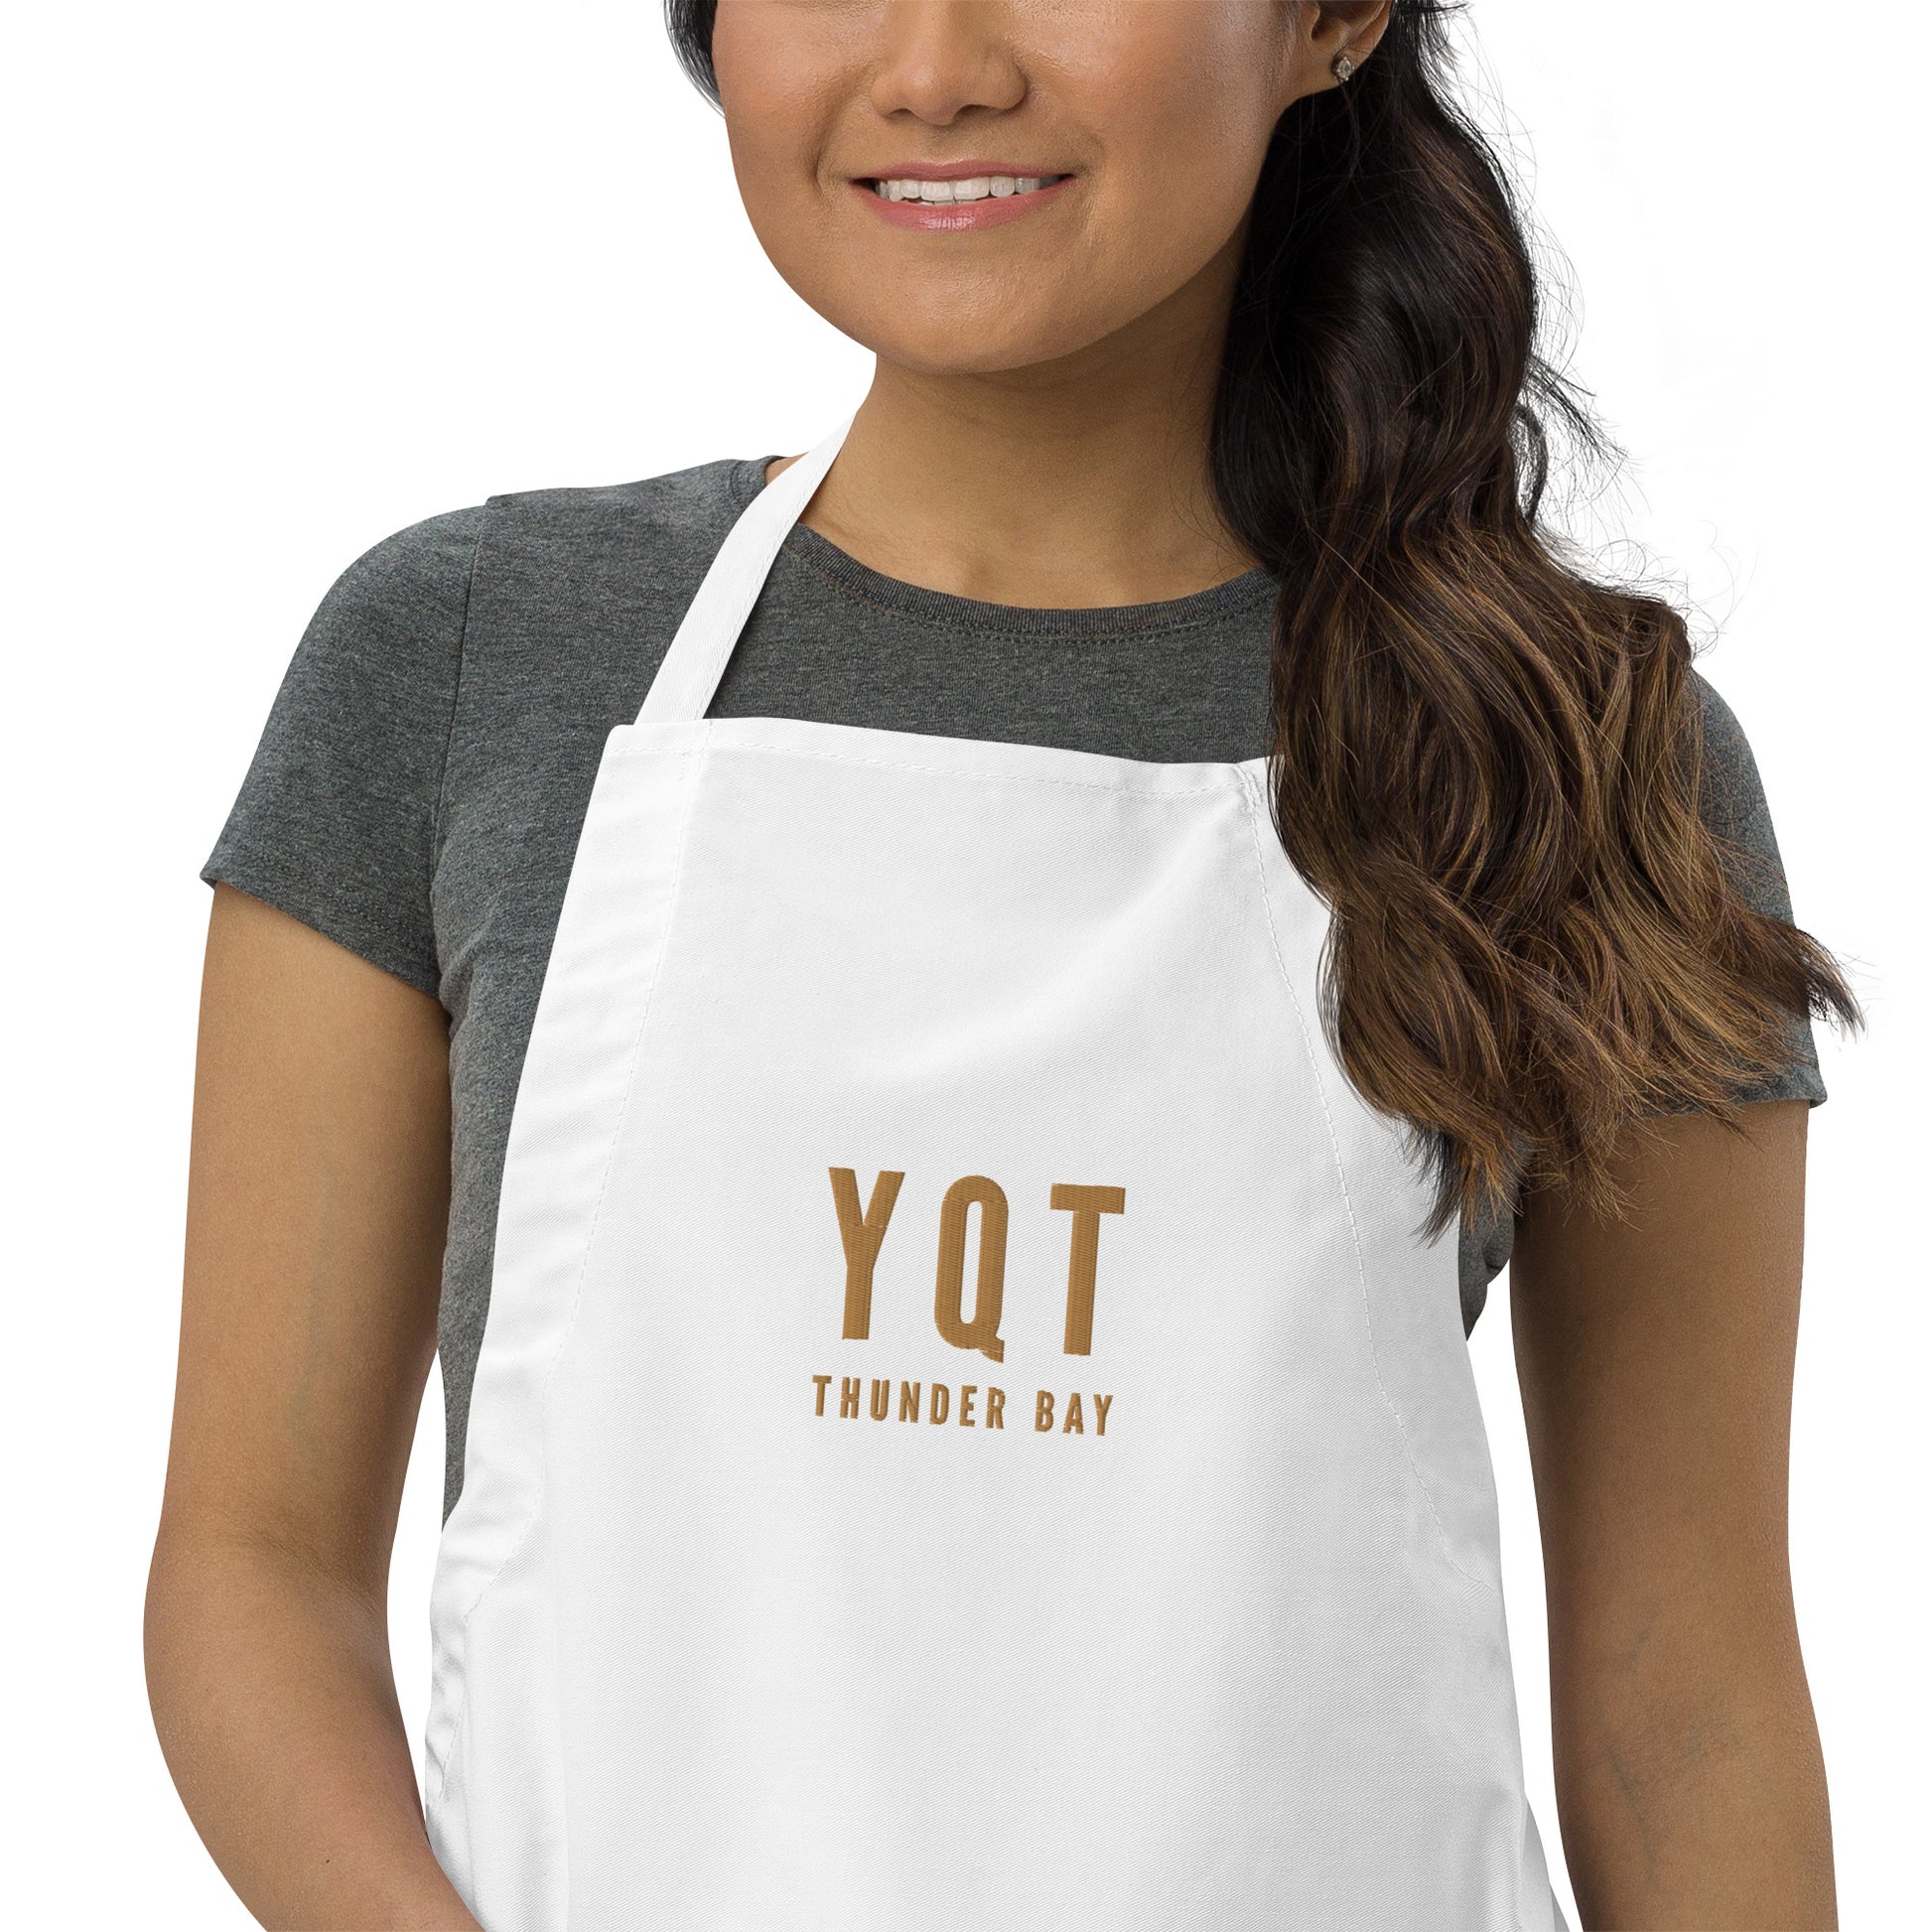 City Embroidered Apron - Old Gold • YQT Thunder Bay • YHM Designs - Image 08